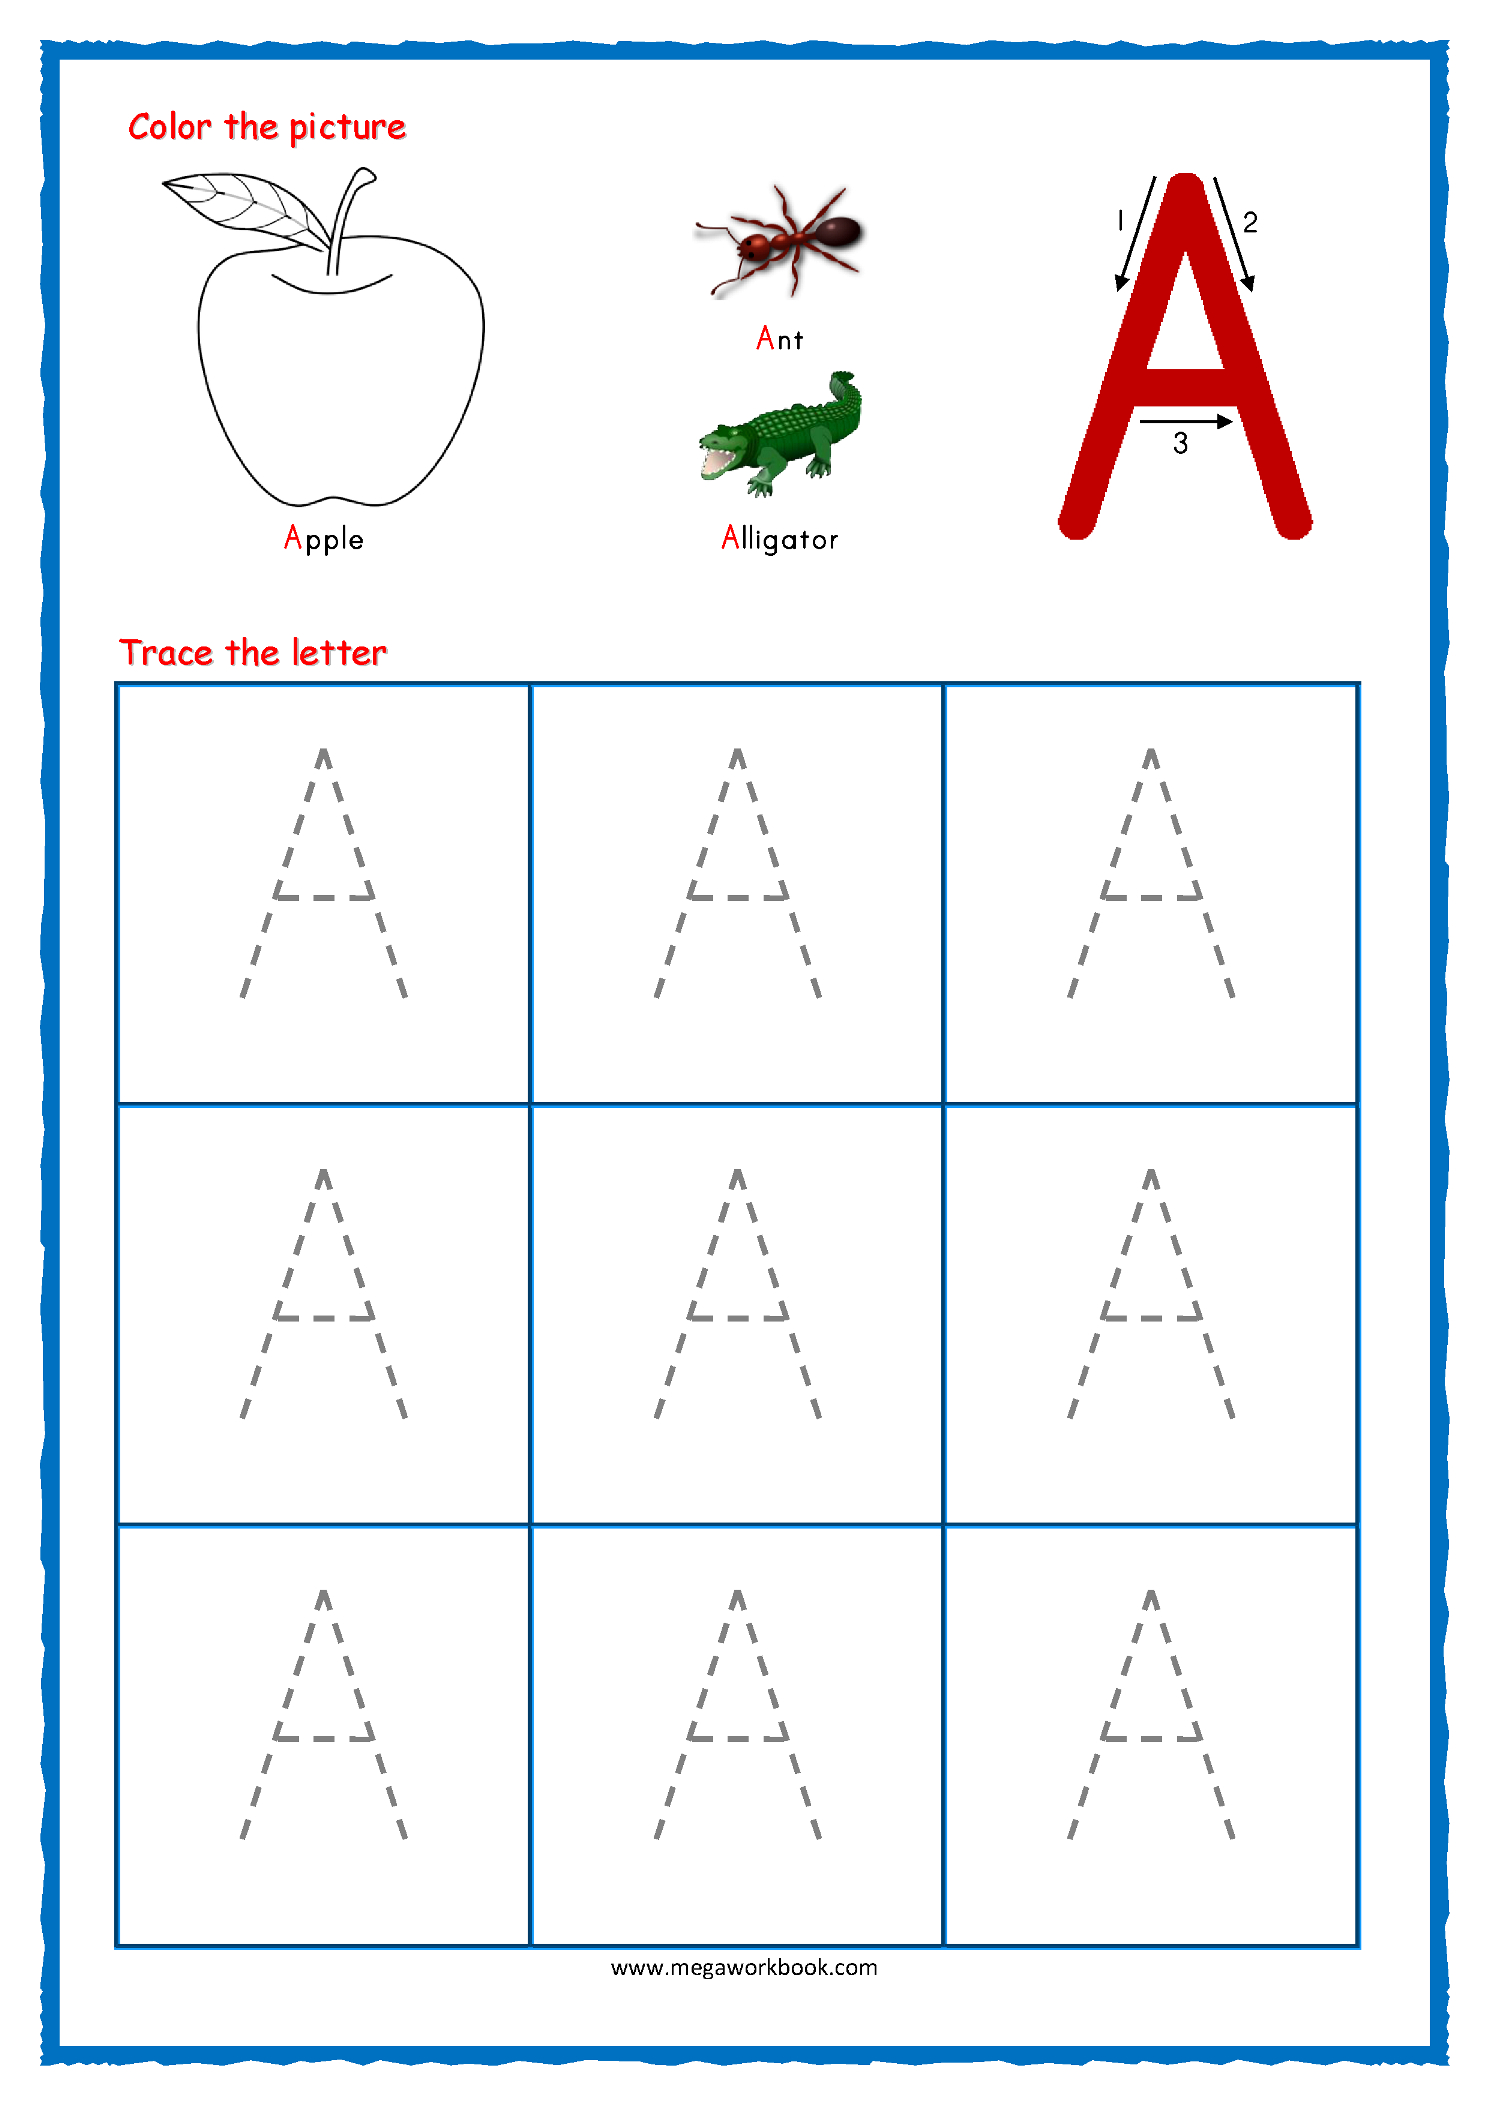 Coloring Book : Coloring Book Alphabet Tracing Worksheets with Trace Letter A Worksheets Free